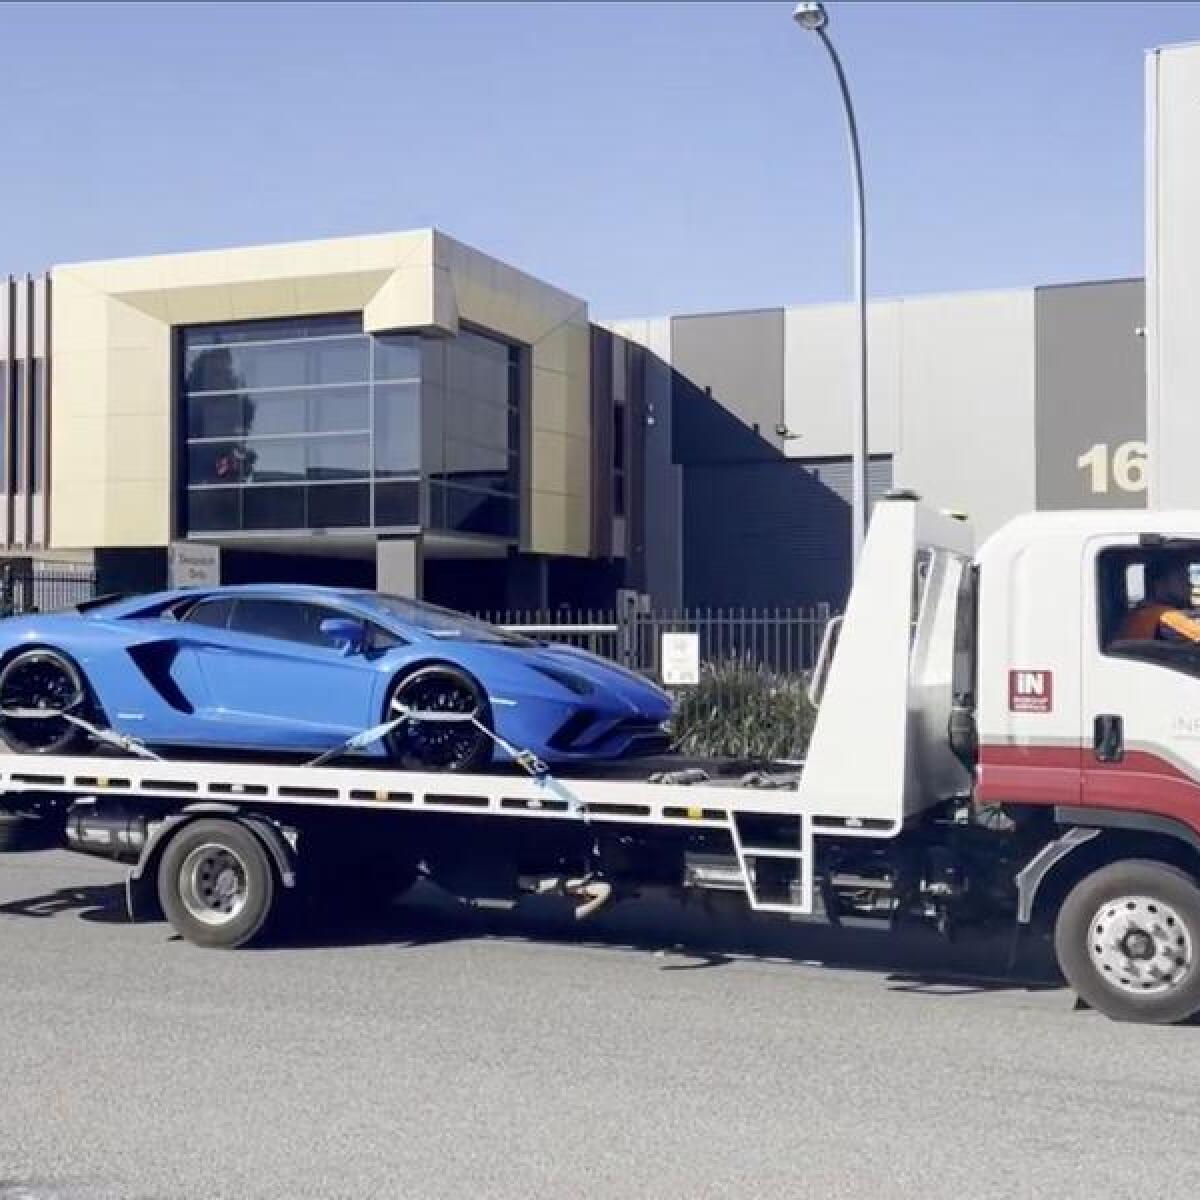 A Lamborghini on the back of a tow truck.